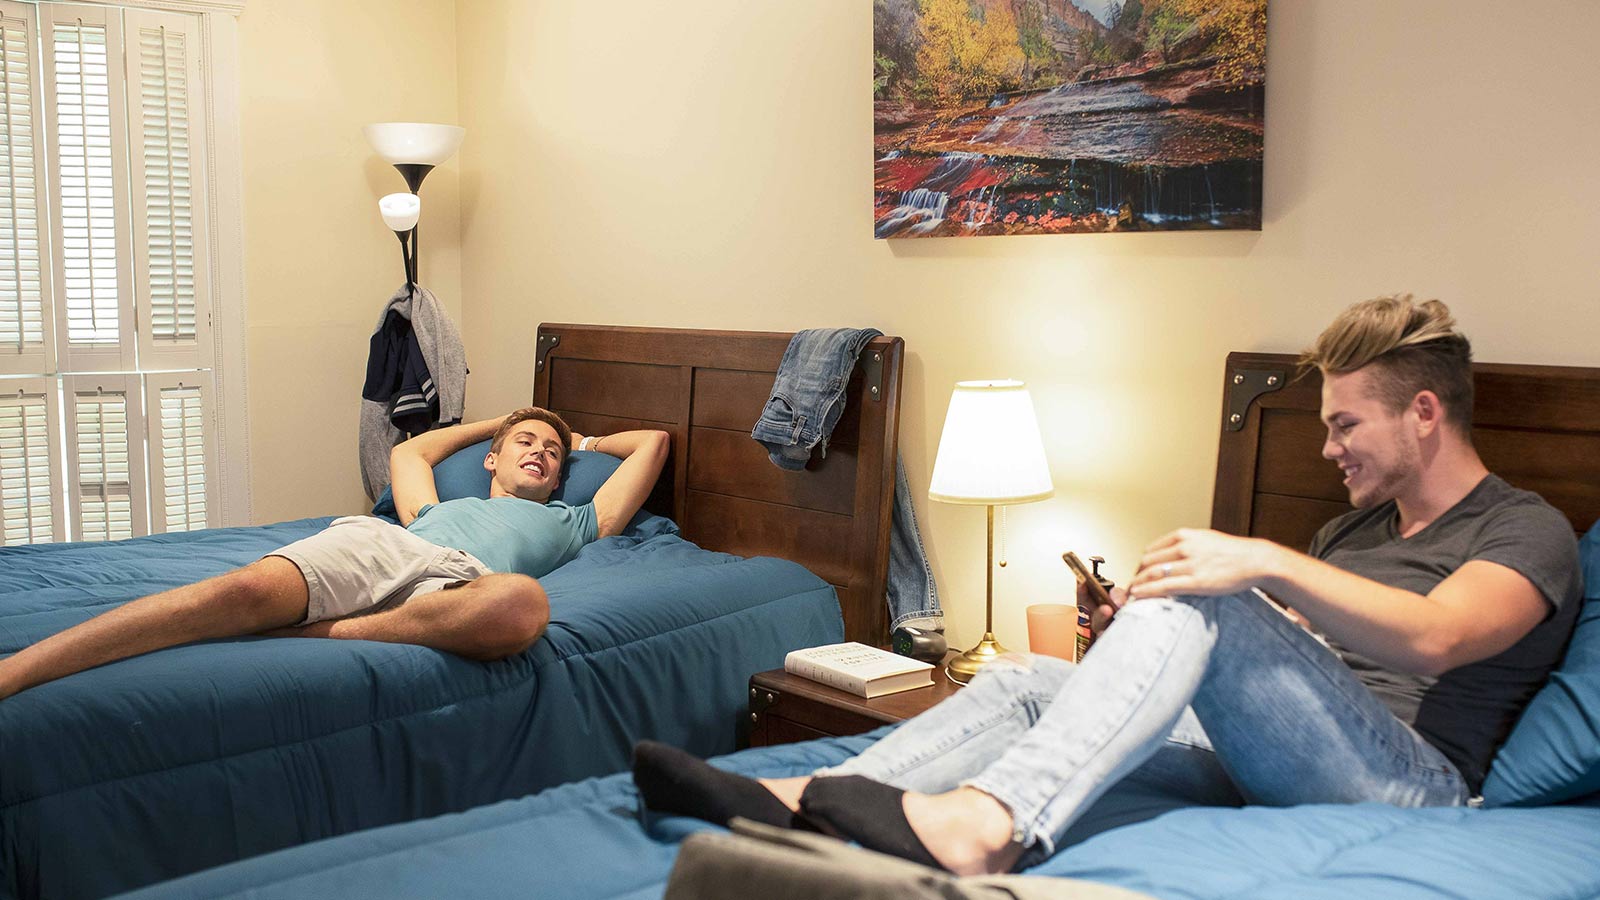 Two men lying on separate beds in a bedroom, one with a phone and the other relaxing.